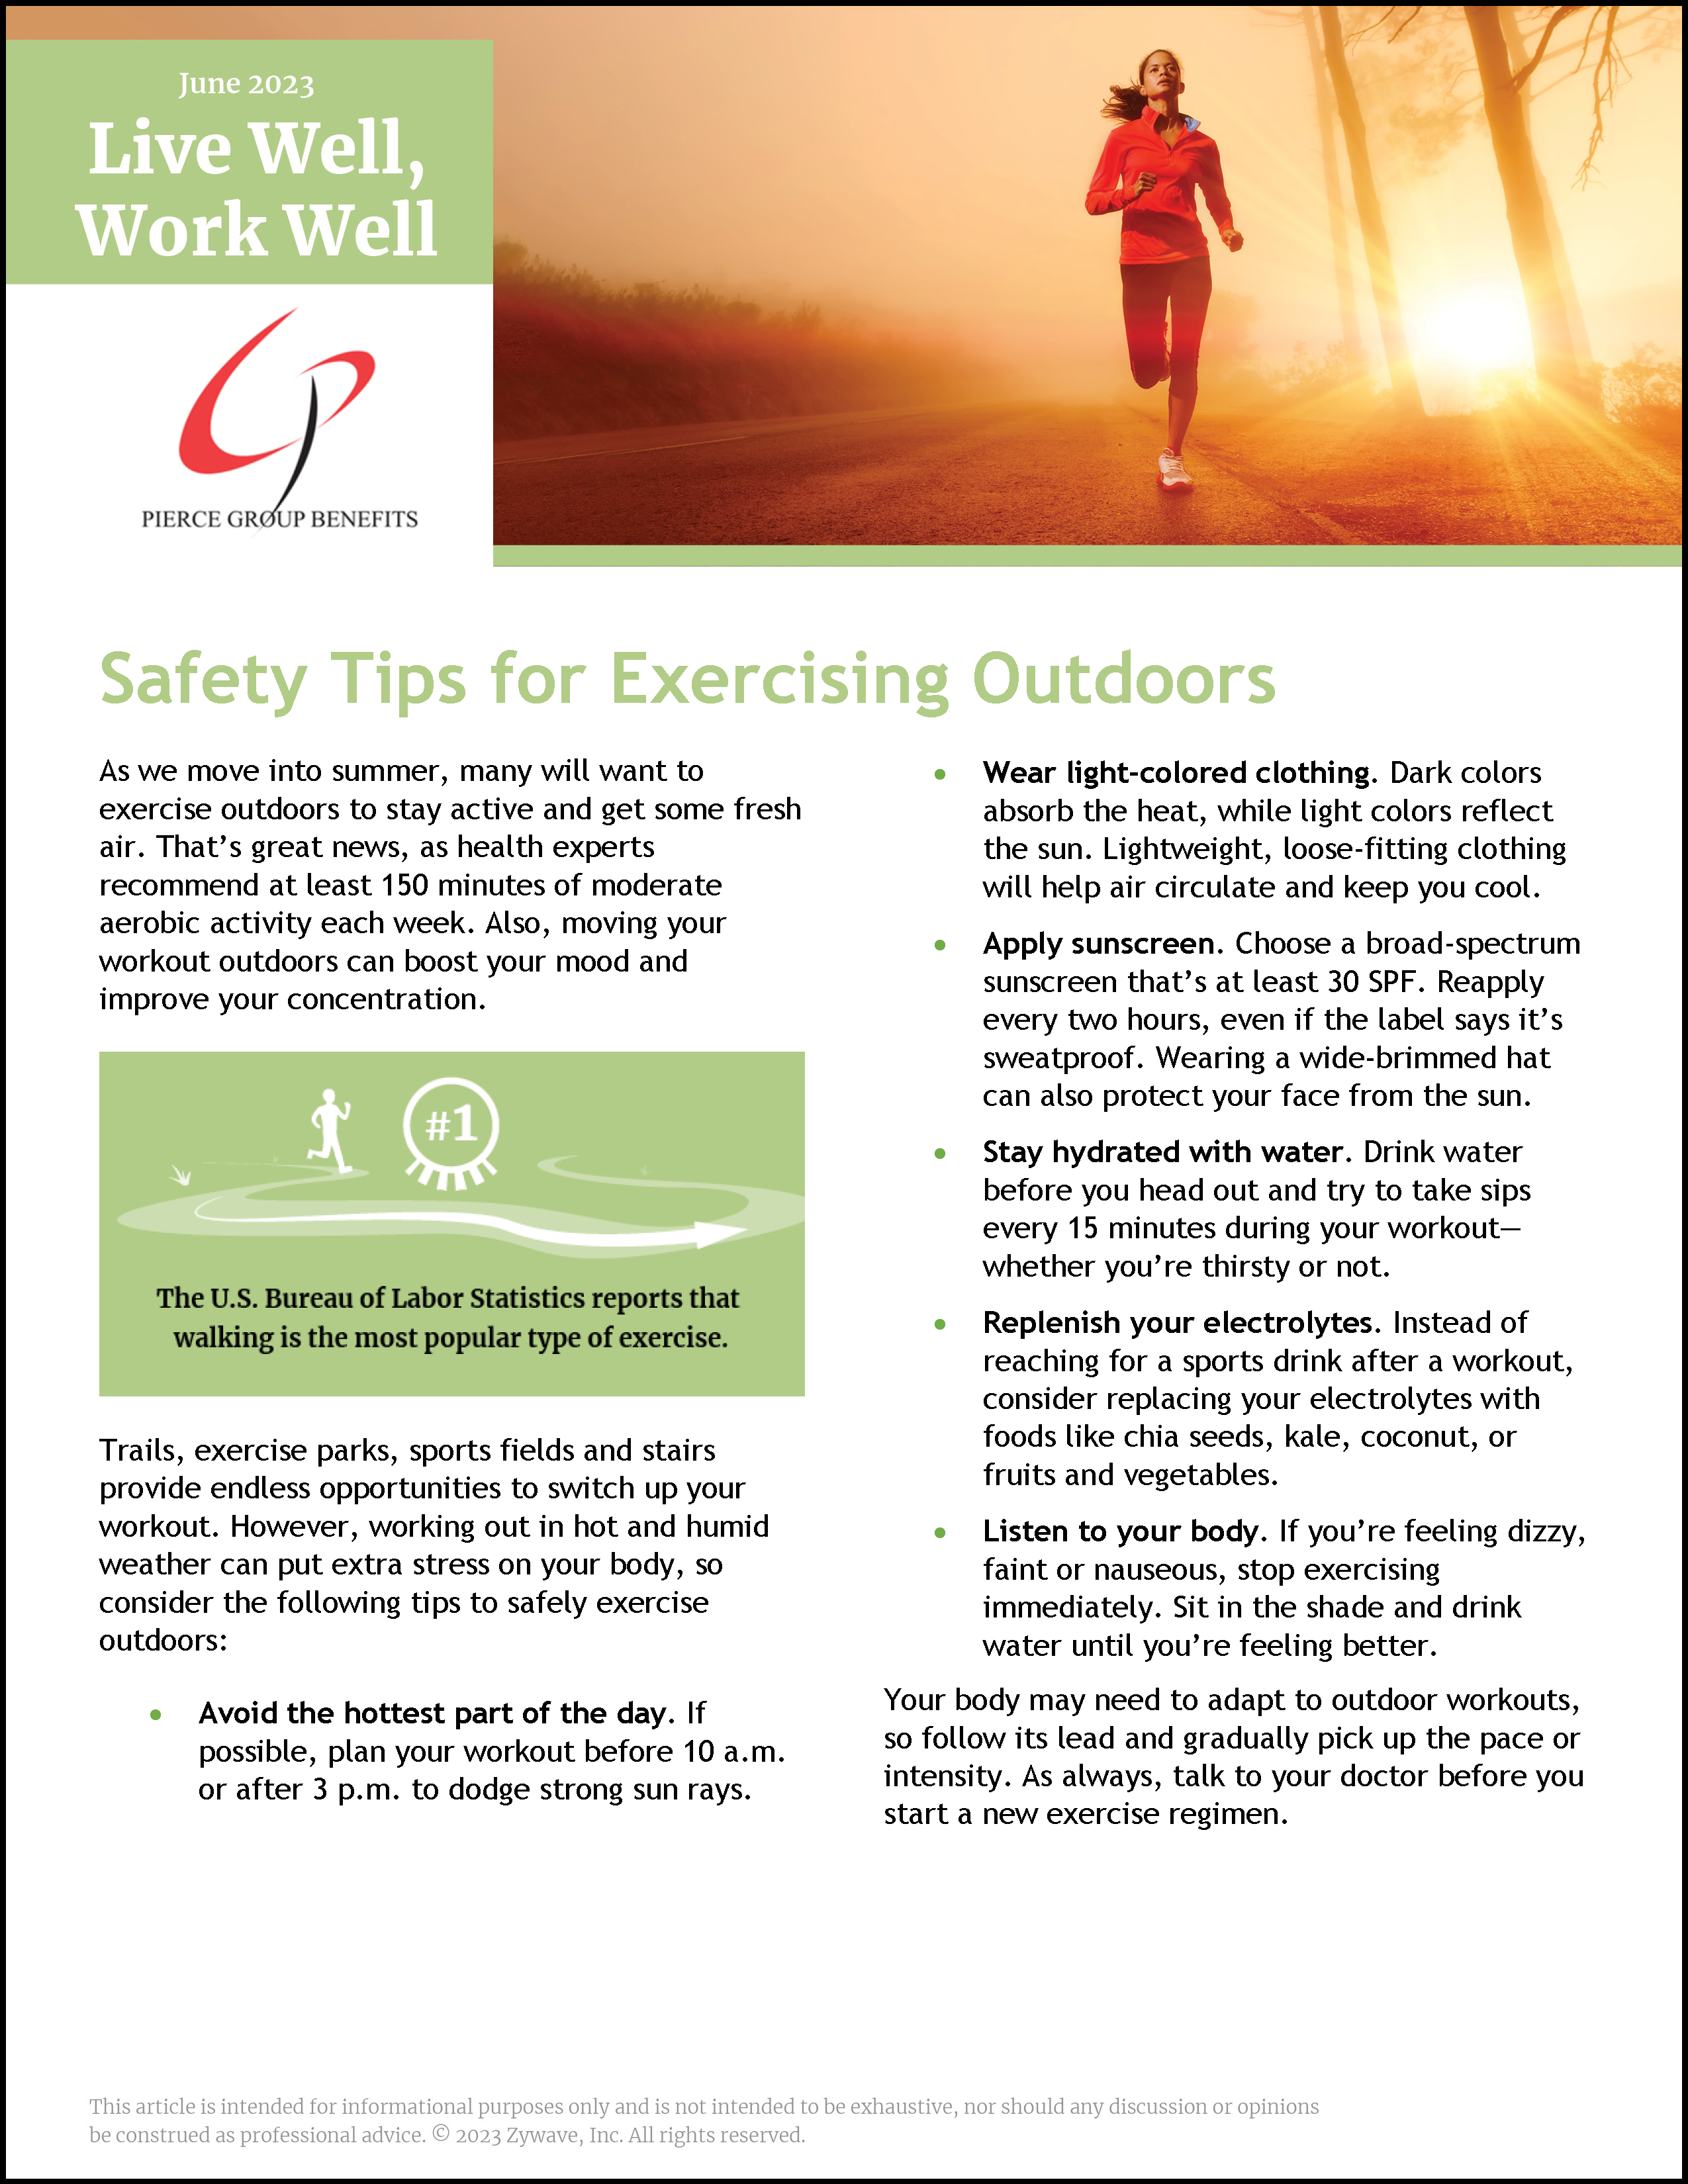 Exercising this Summer: How to Stay Safe & Healthy